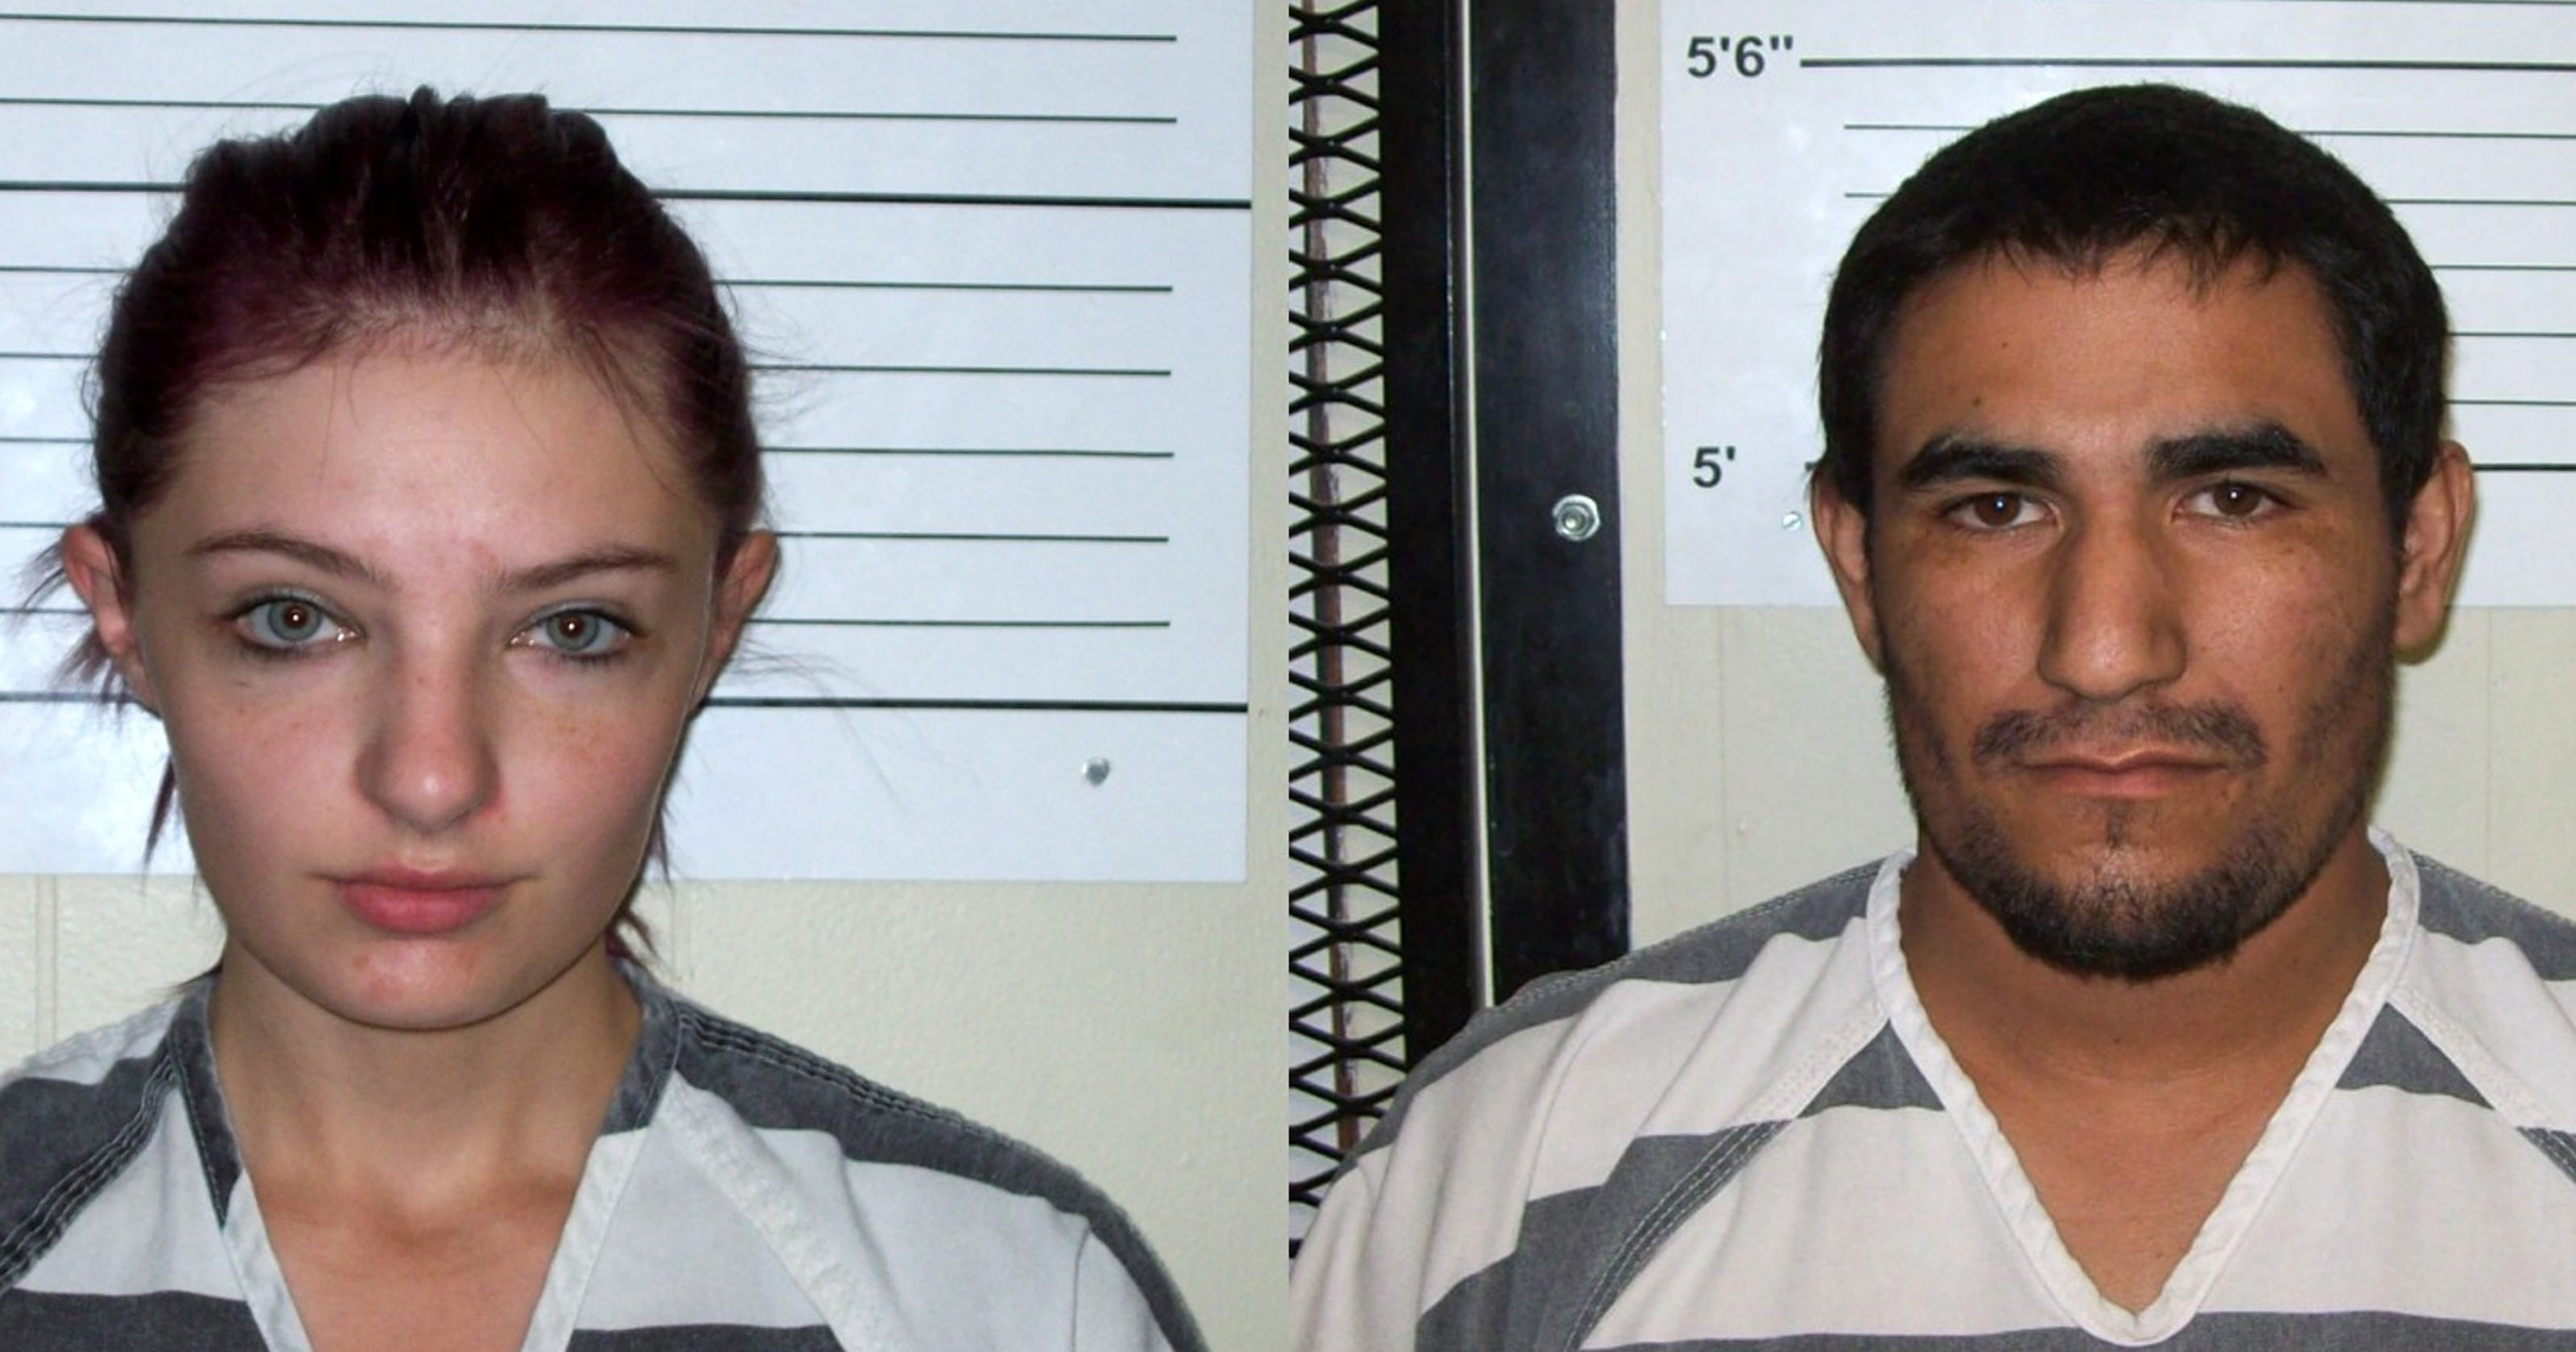 Iowa child death: Parents charged after infant found with maggots